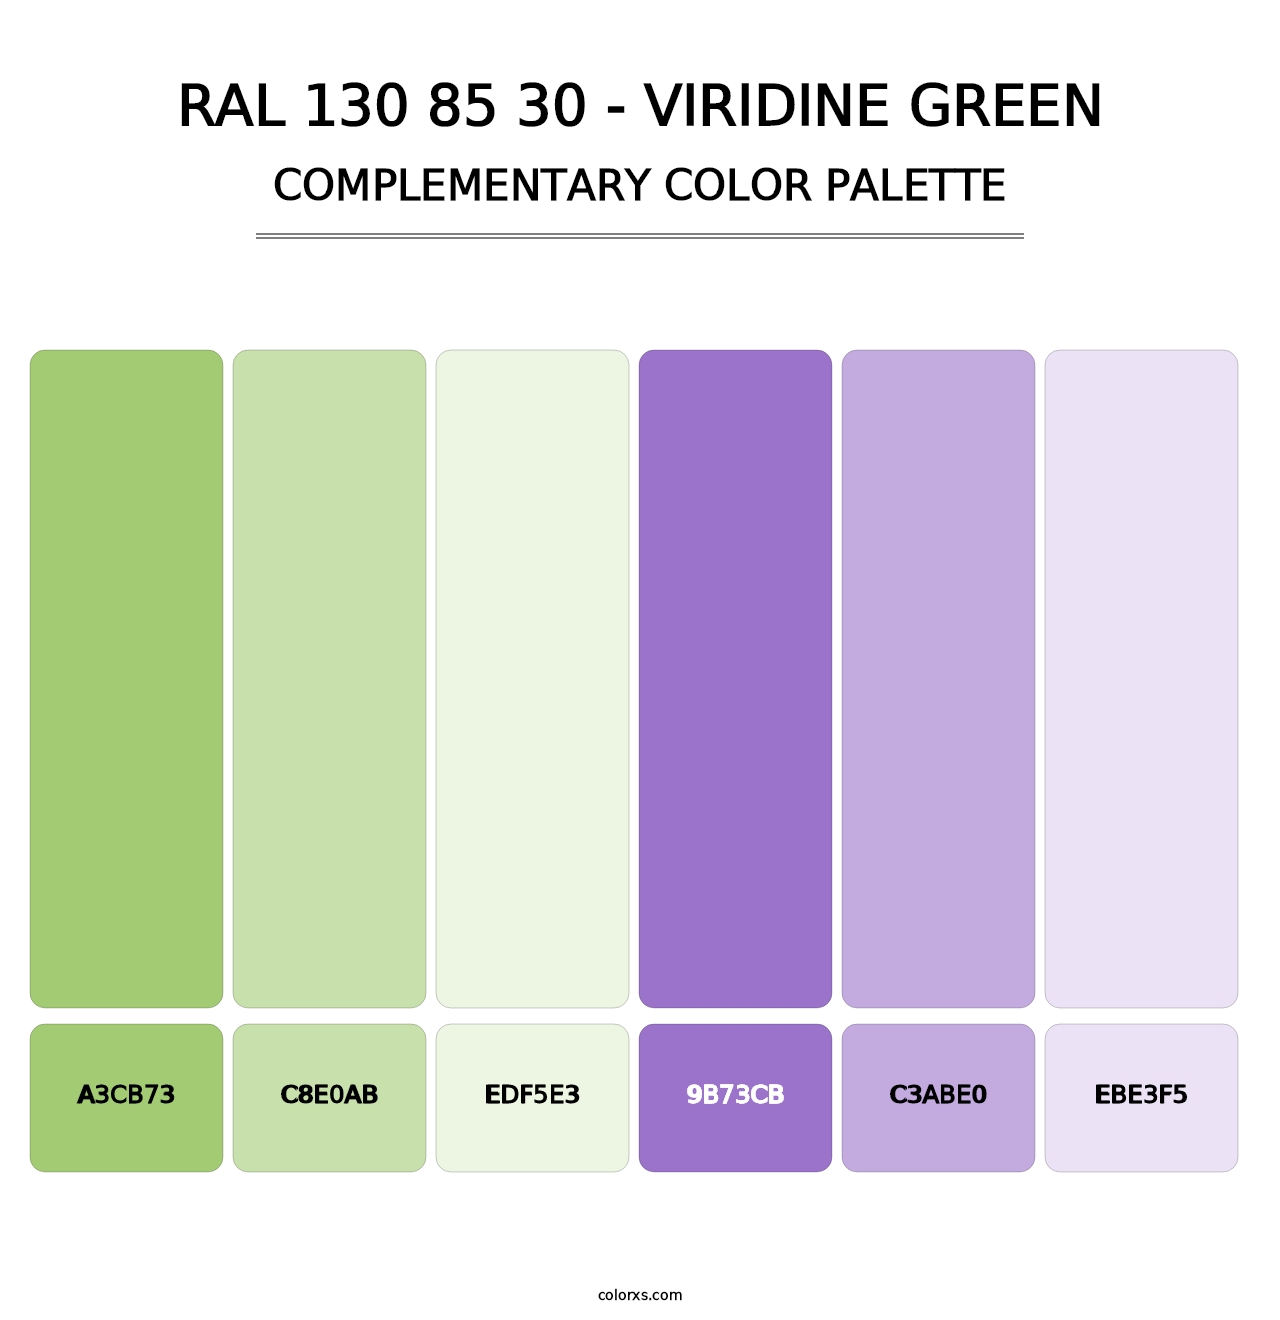 RAL 130 85 30 - Viridine Green - Complementary Color Palette